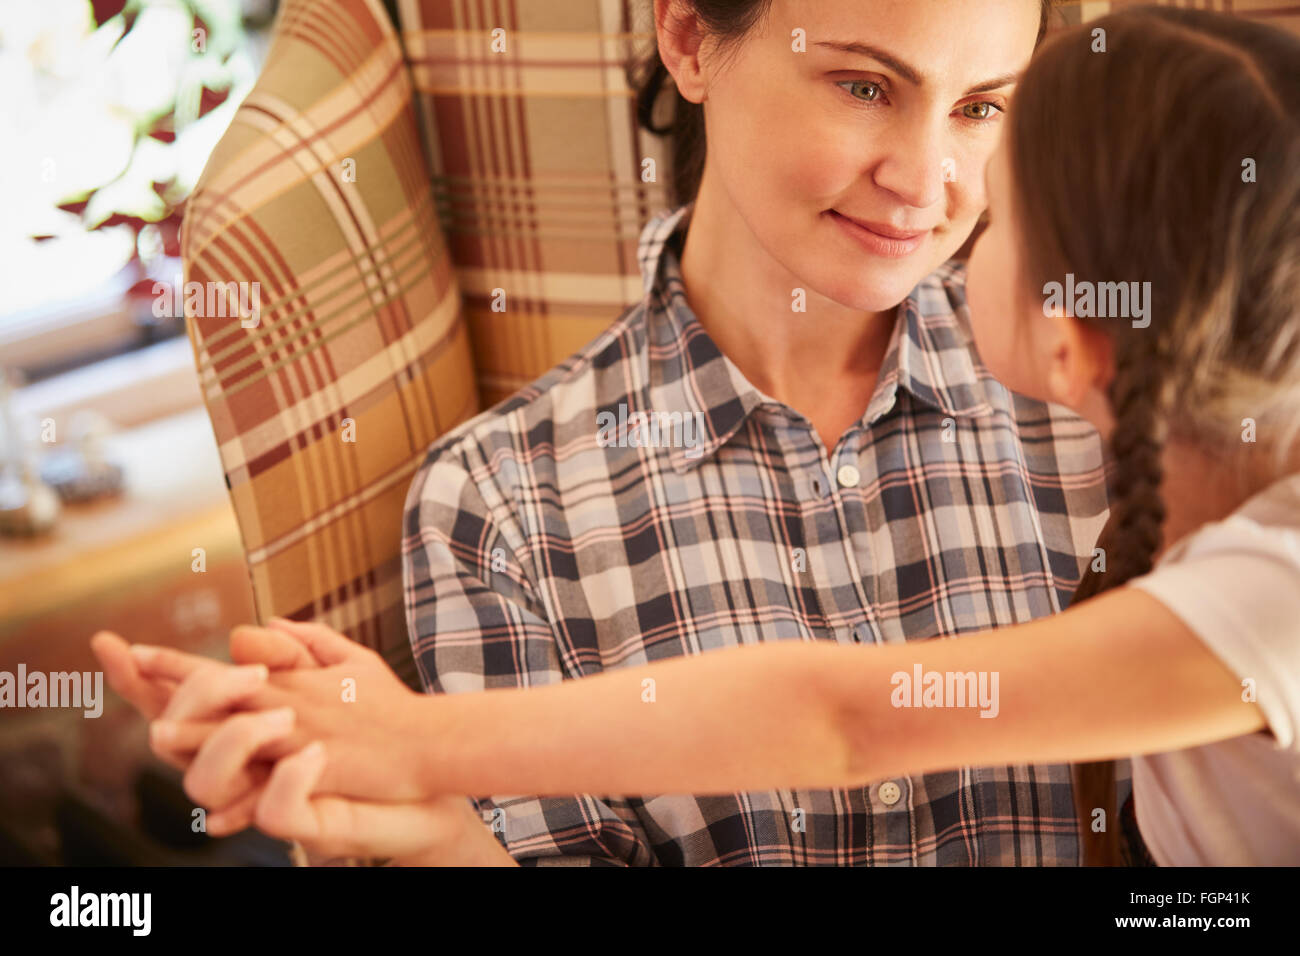 Mother and daughter holding hands face to face Stock Photo